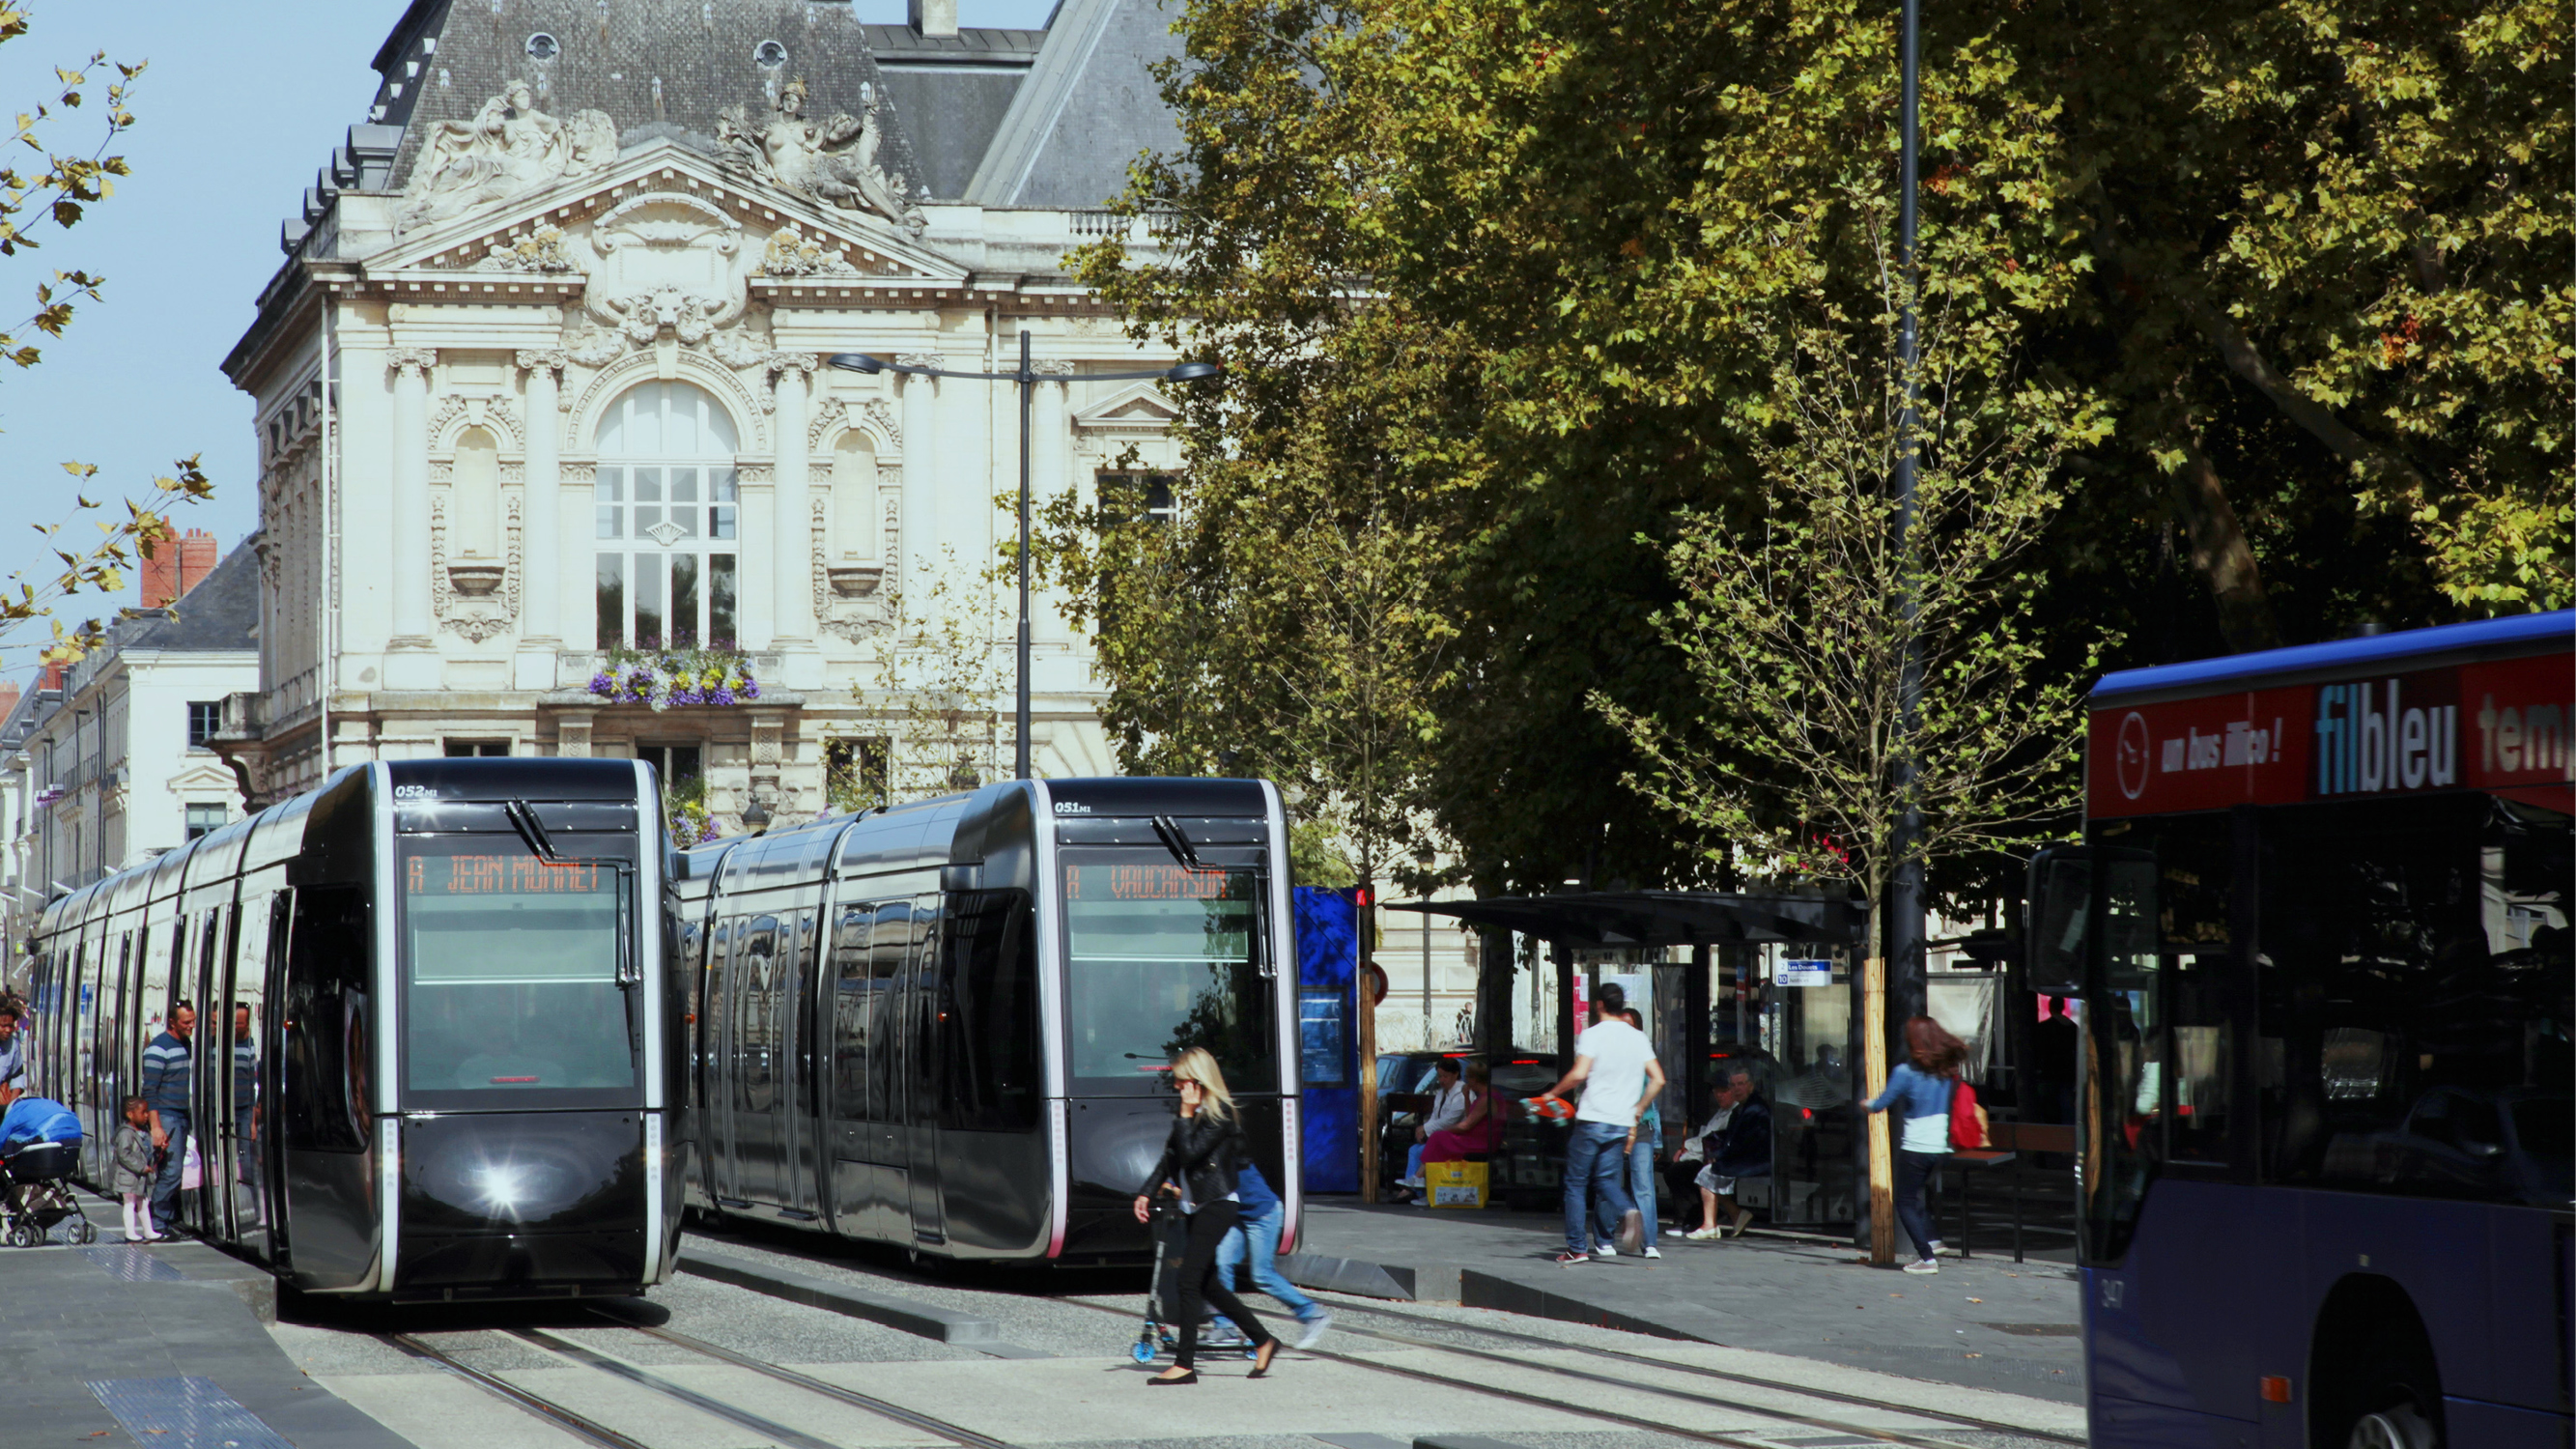 tram network operated by keolis